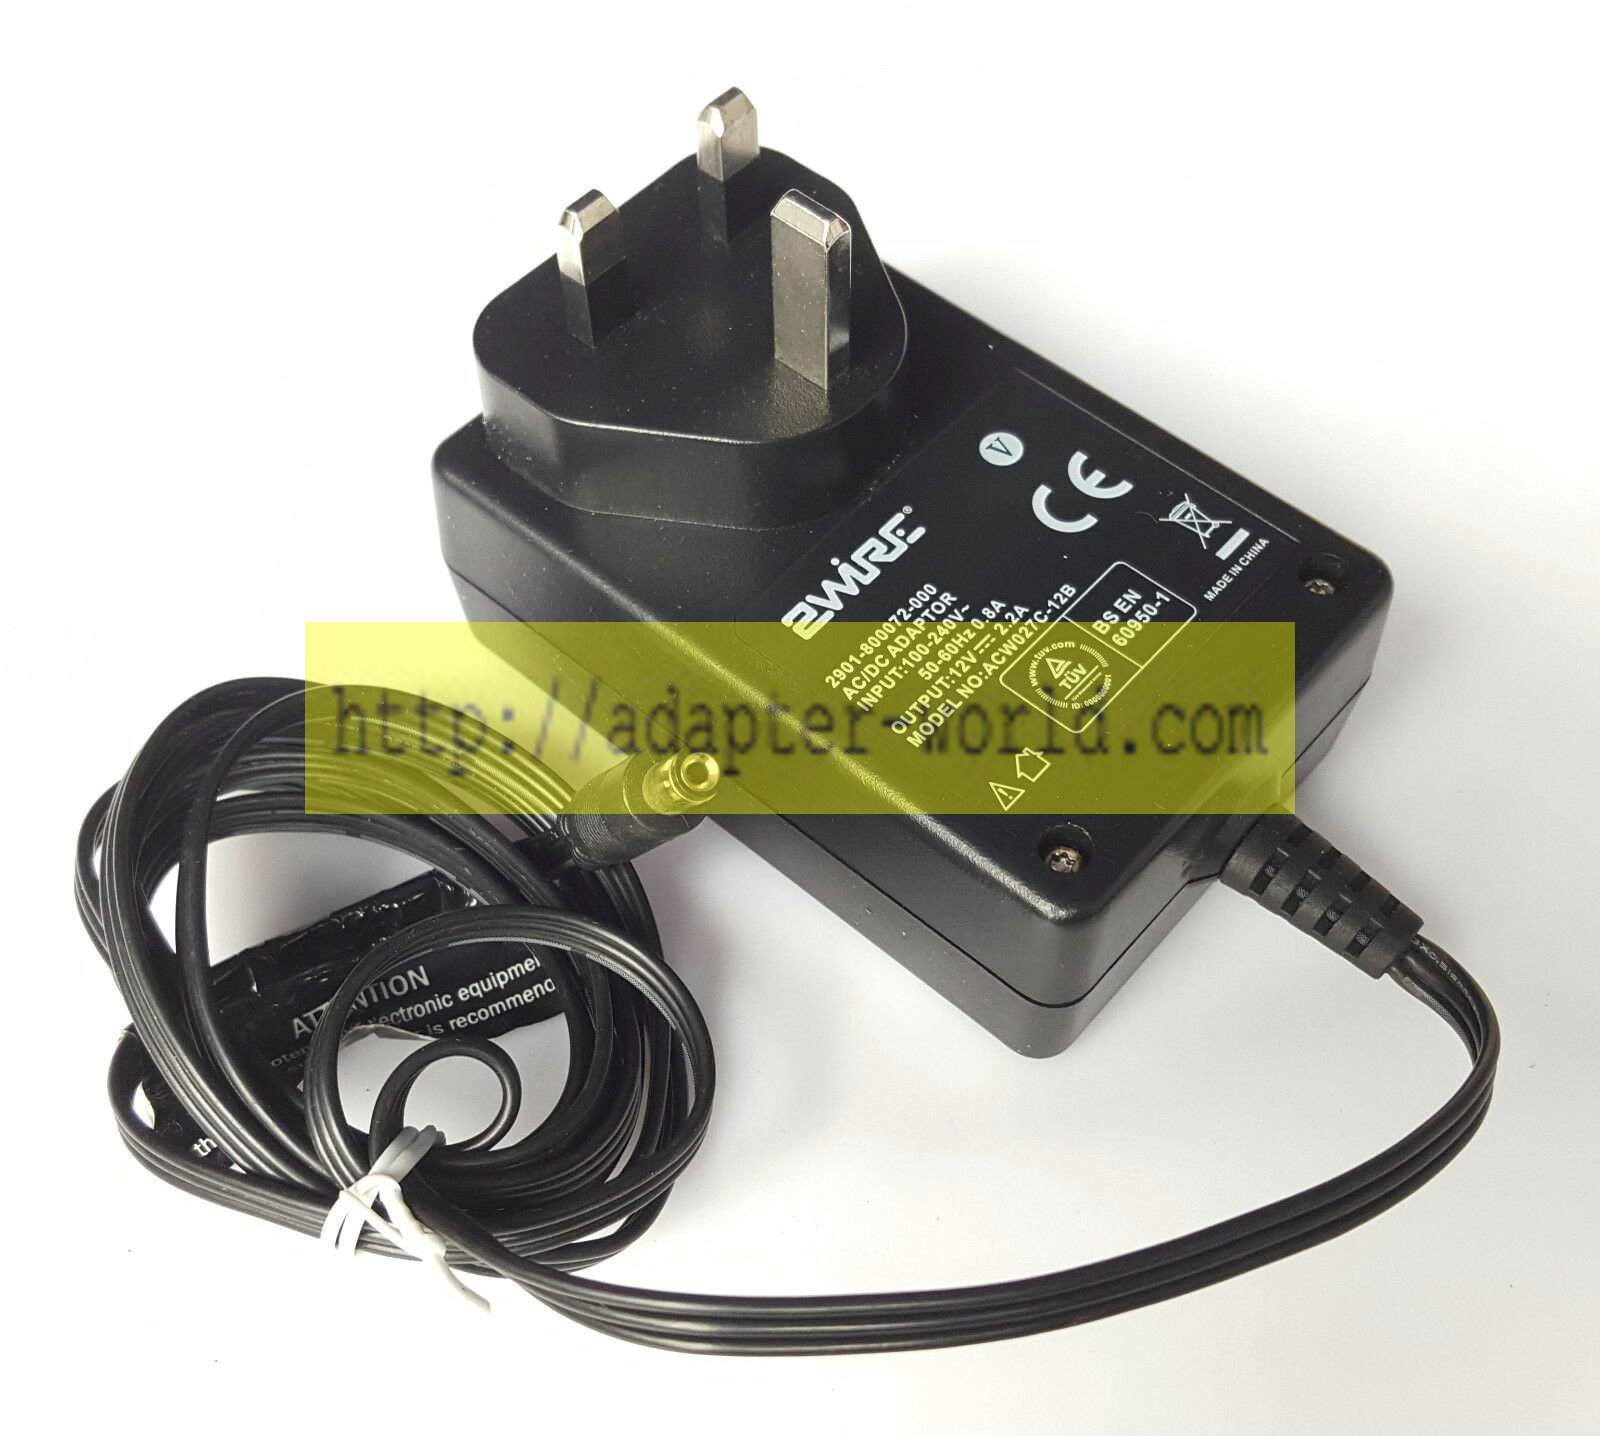 *Brand NEW* 2WIRE ACW027C-12B 2901-800072-000 12V 2.2A AC/DC ADAPTER POWER SUPPLY